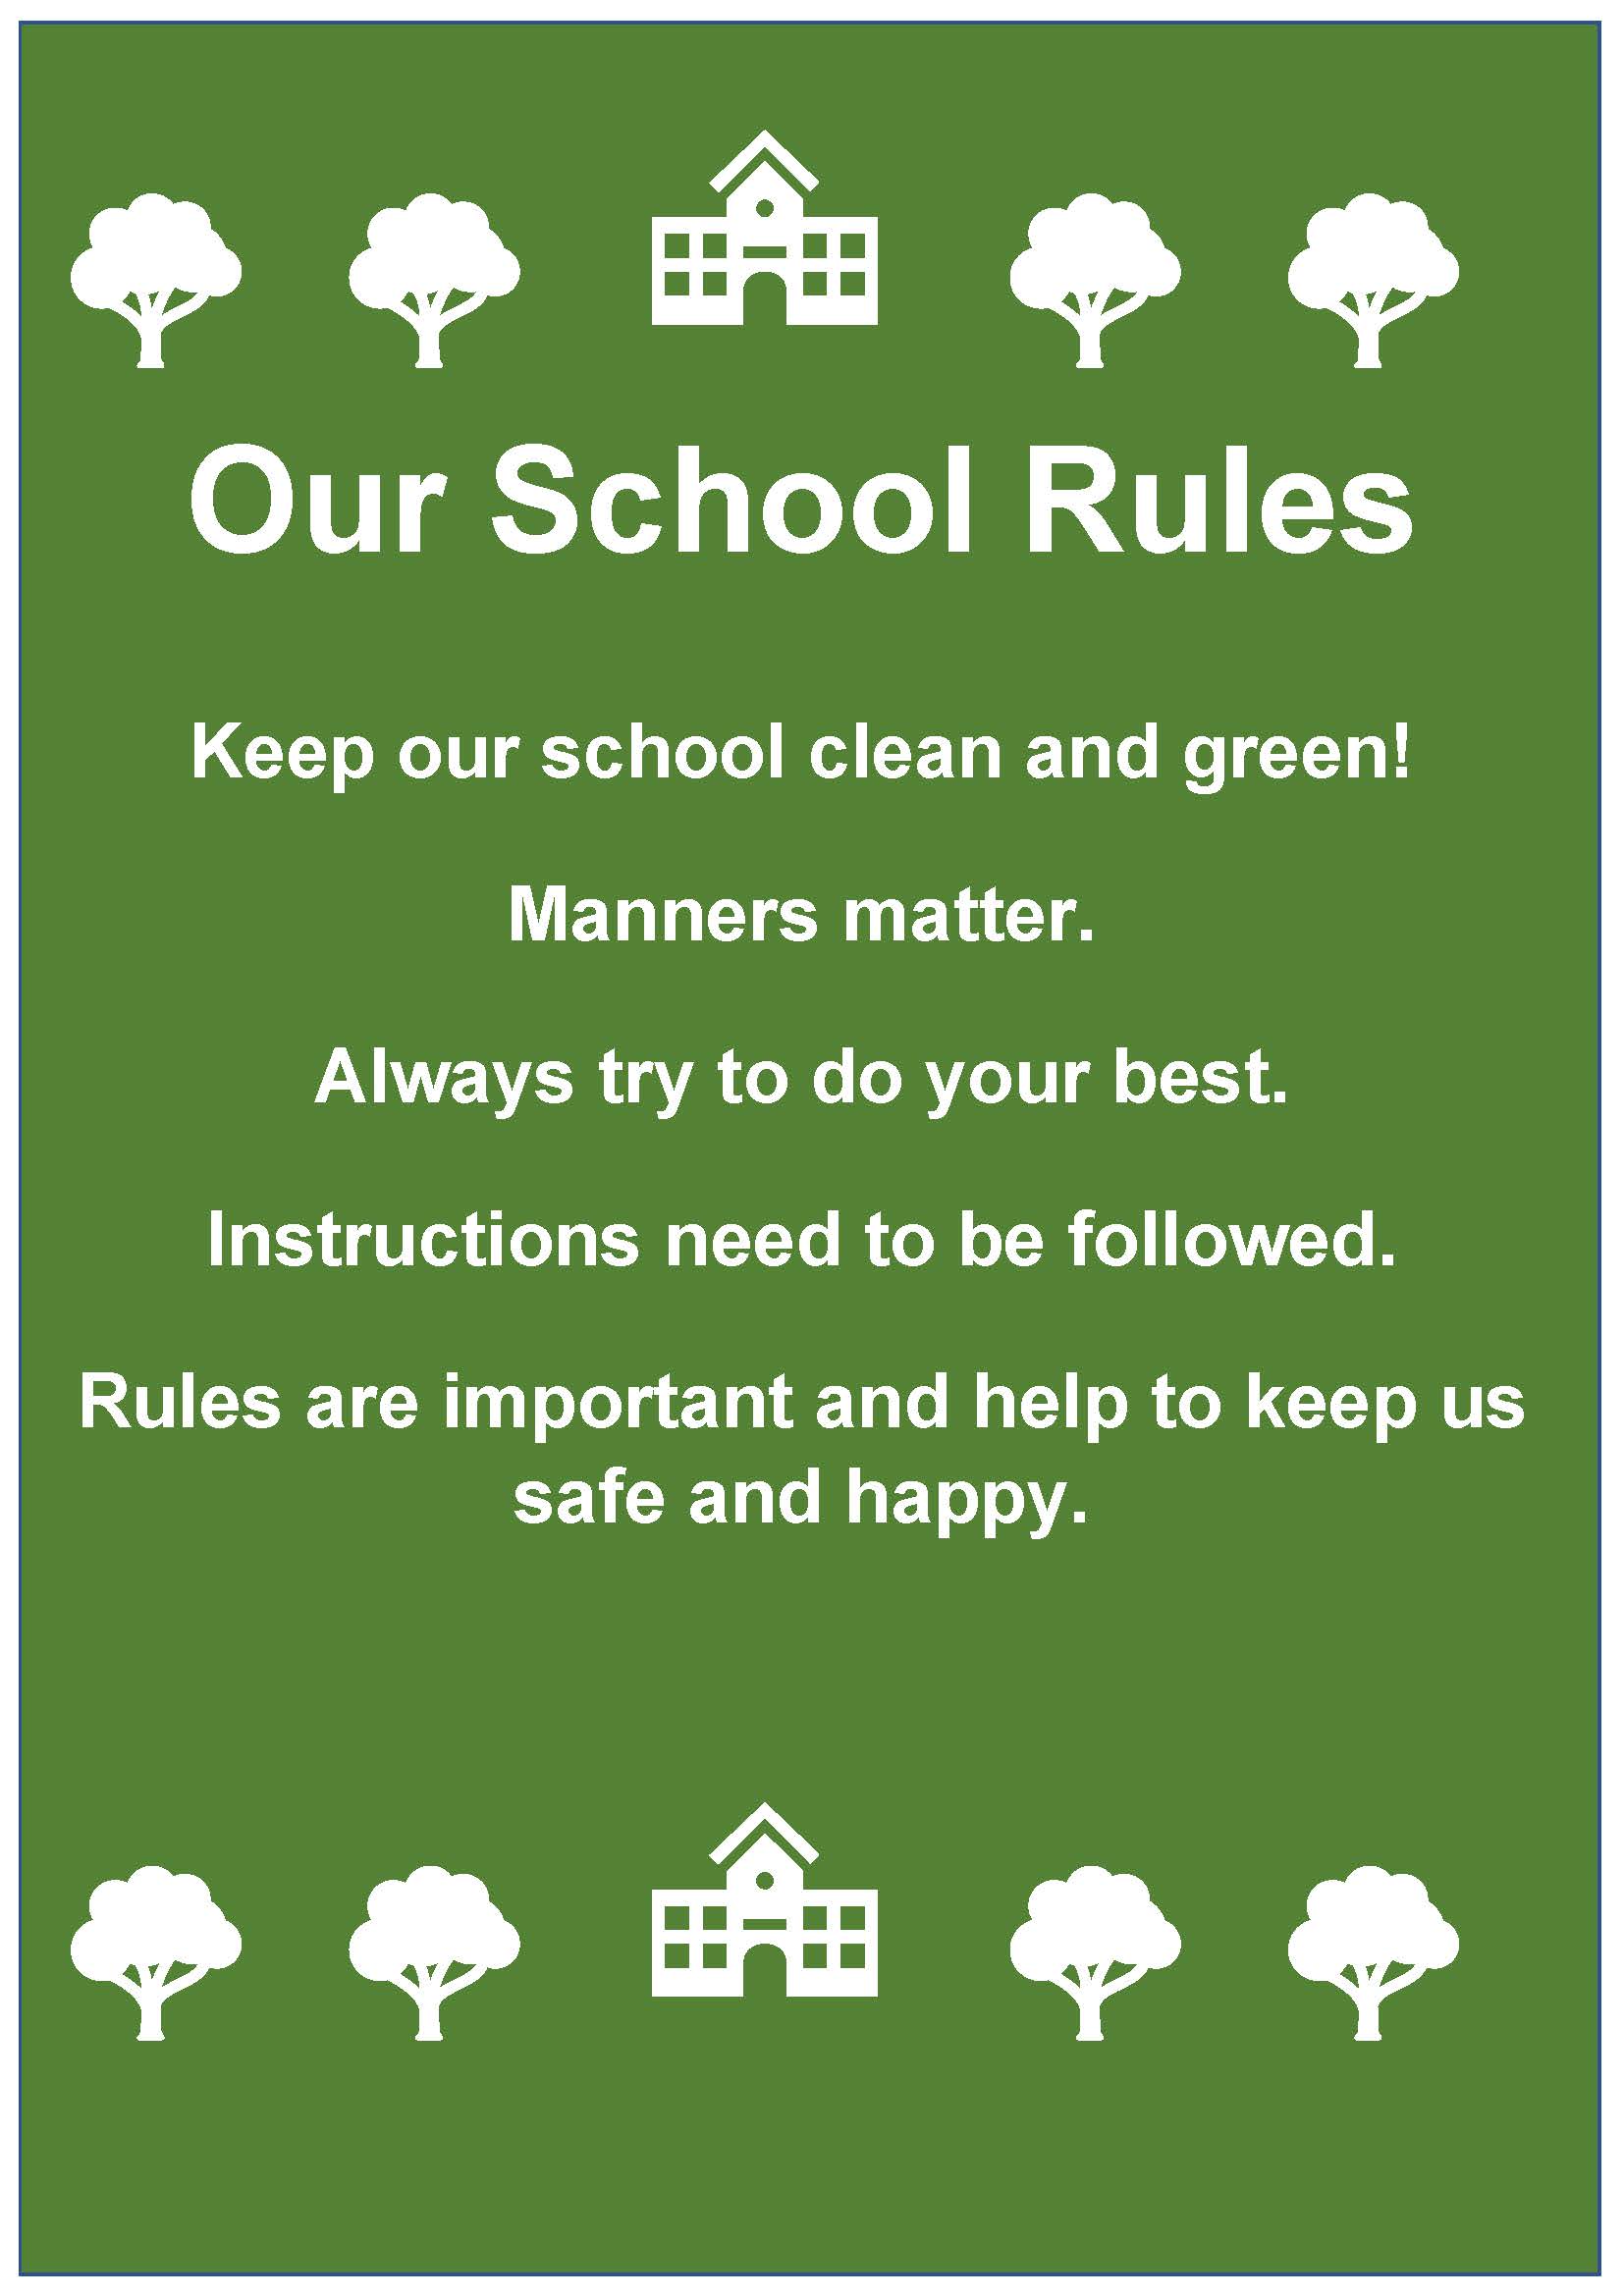 presentation about school rules